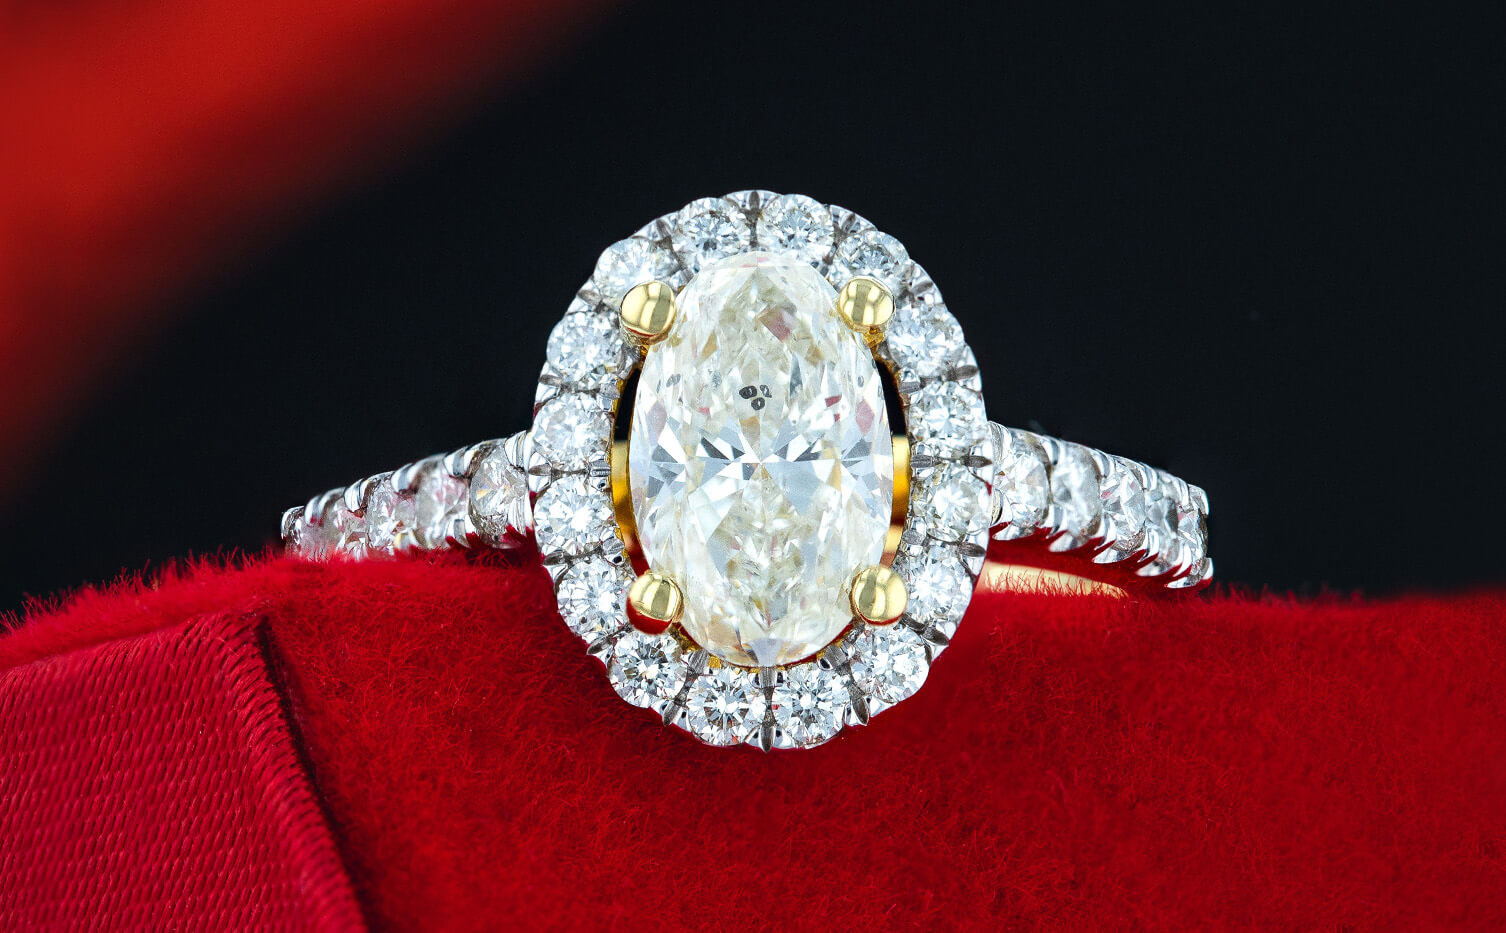 Celebrities With Yellow Diamond Engagement Rings | Overview